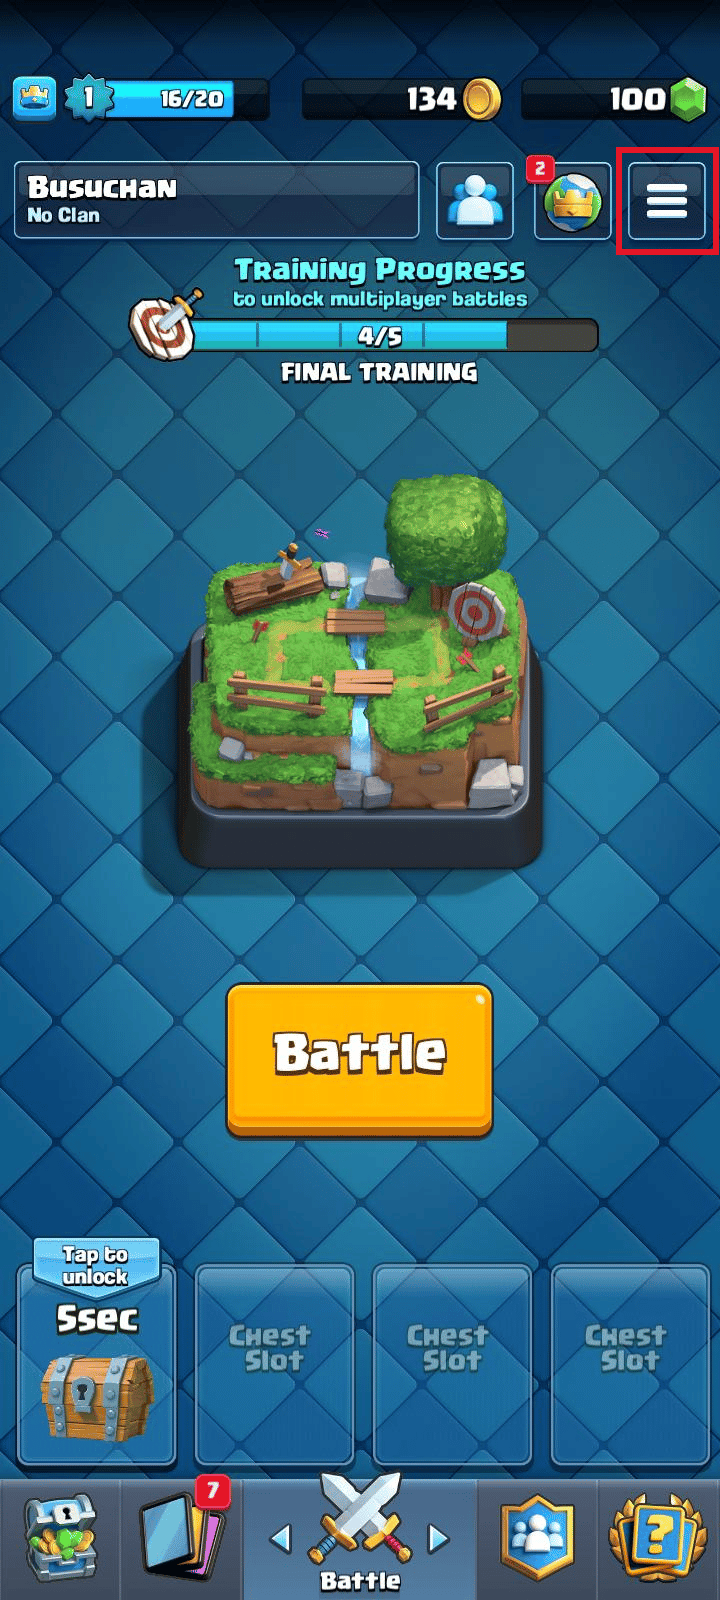 Tap on the hamburger menu icon on the top-right of the screen | How to delete clash royale account